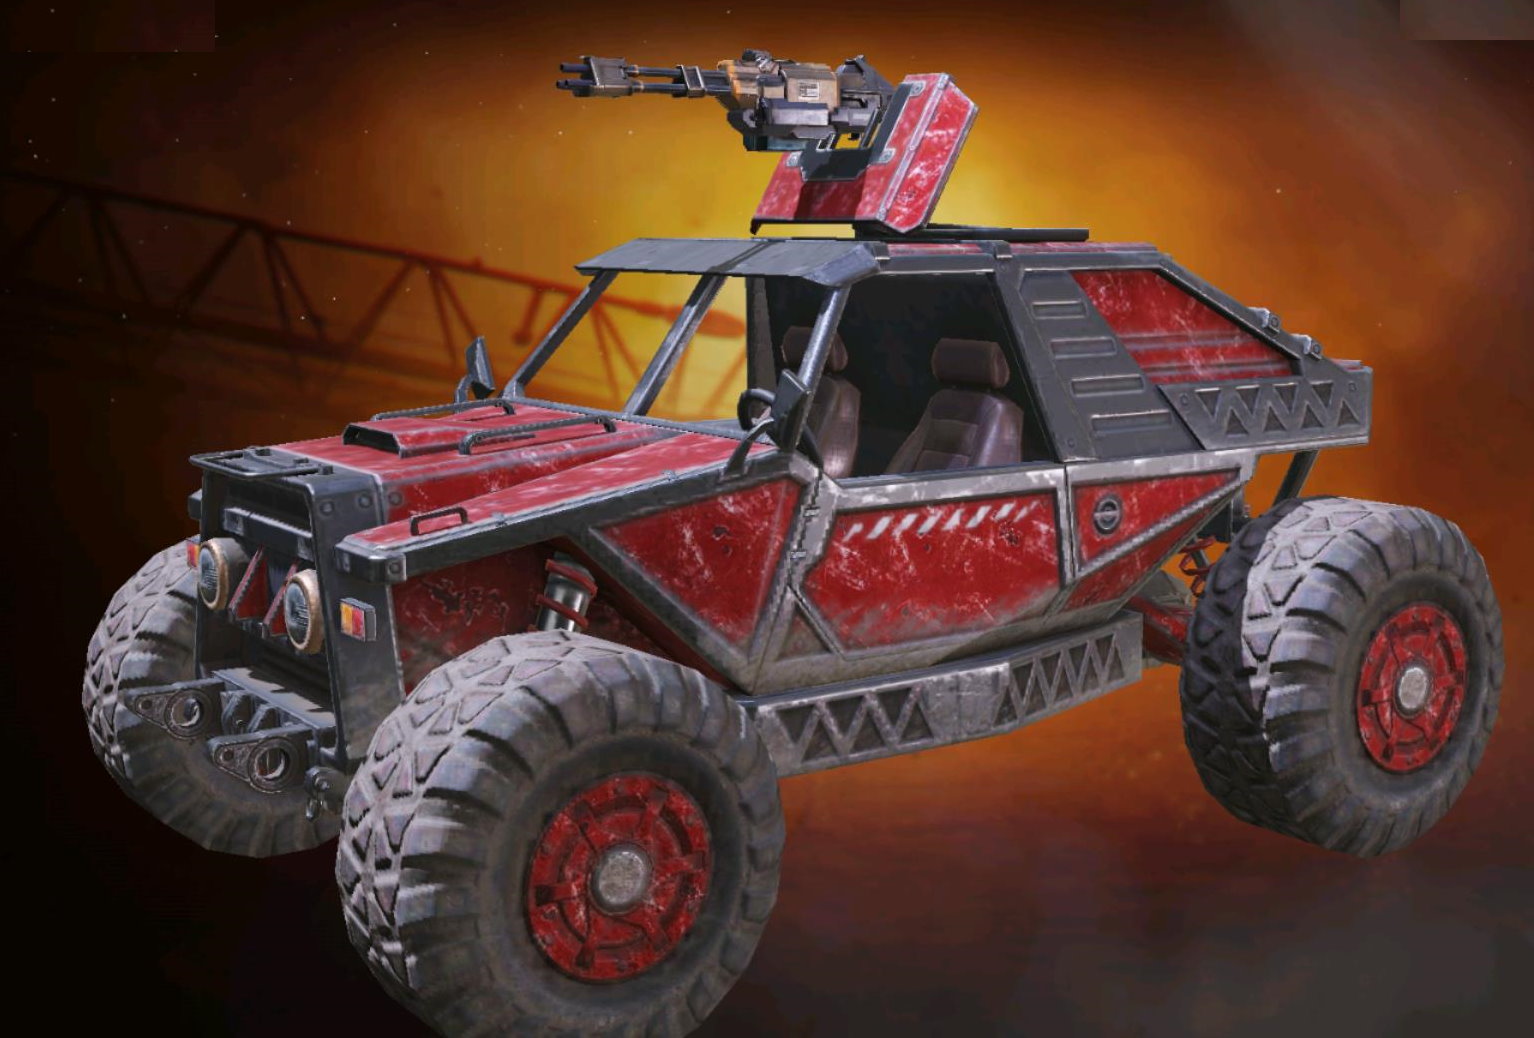 Antelope A20 Wasteland Red, Uncommon camo in Call of Duty Mobile